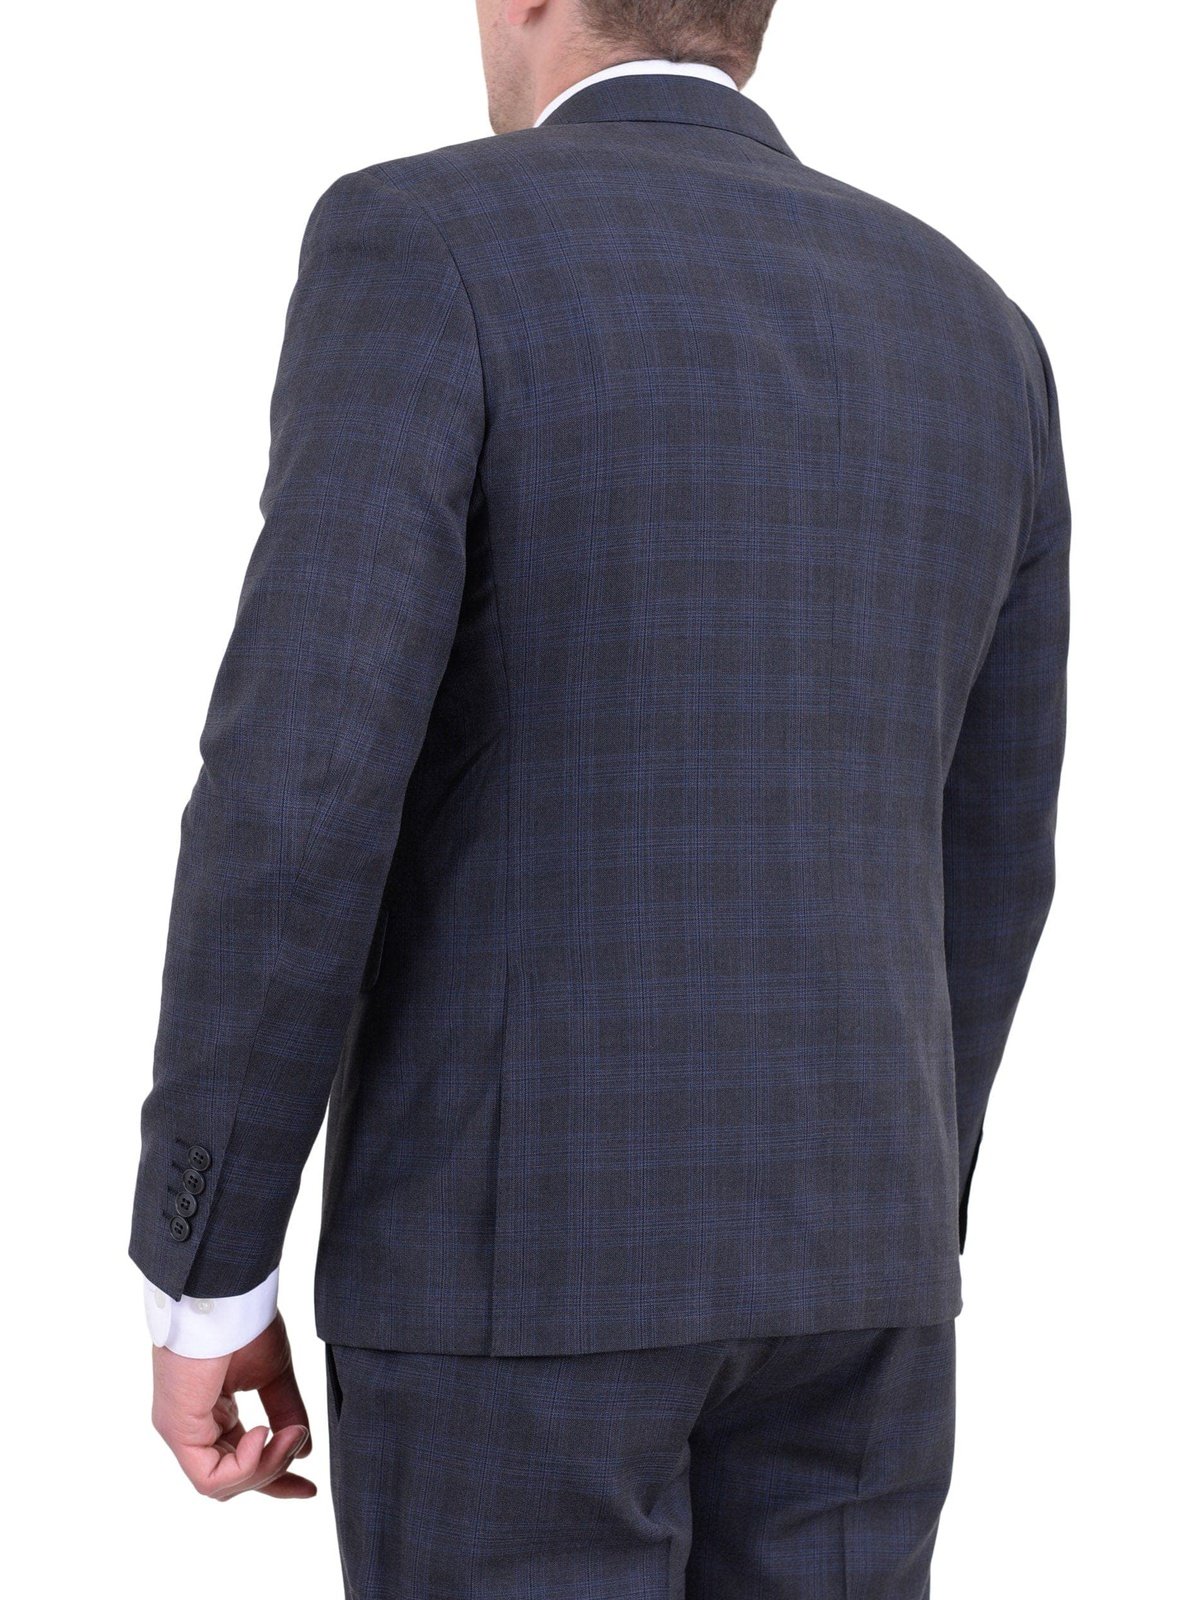 London Fog TWO PIECE SUITS Extra Slim Fit Charcoal Gray Plaid Two Button Wool Blend Suit